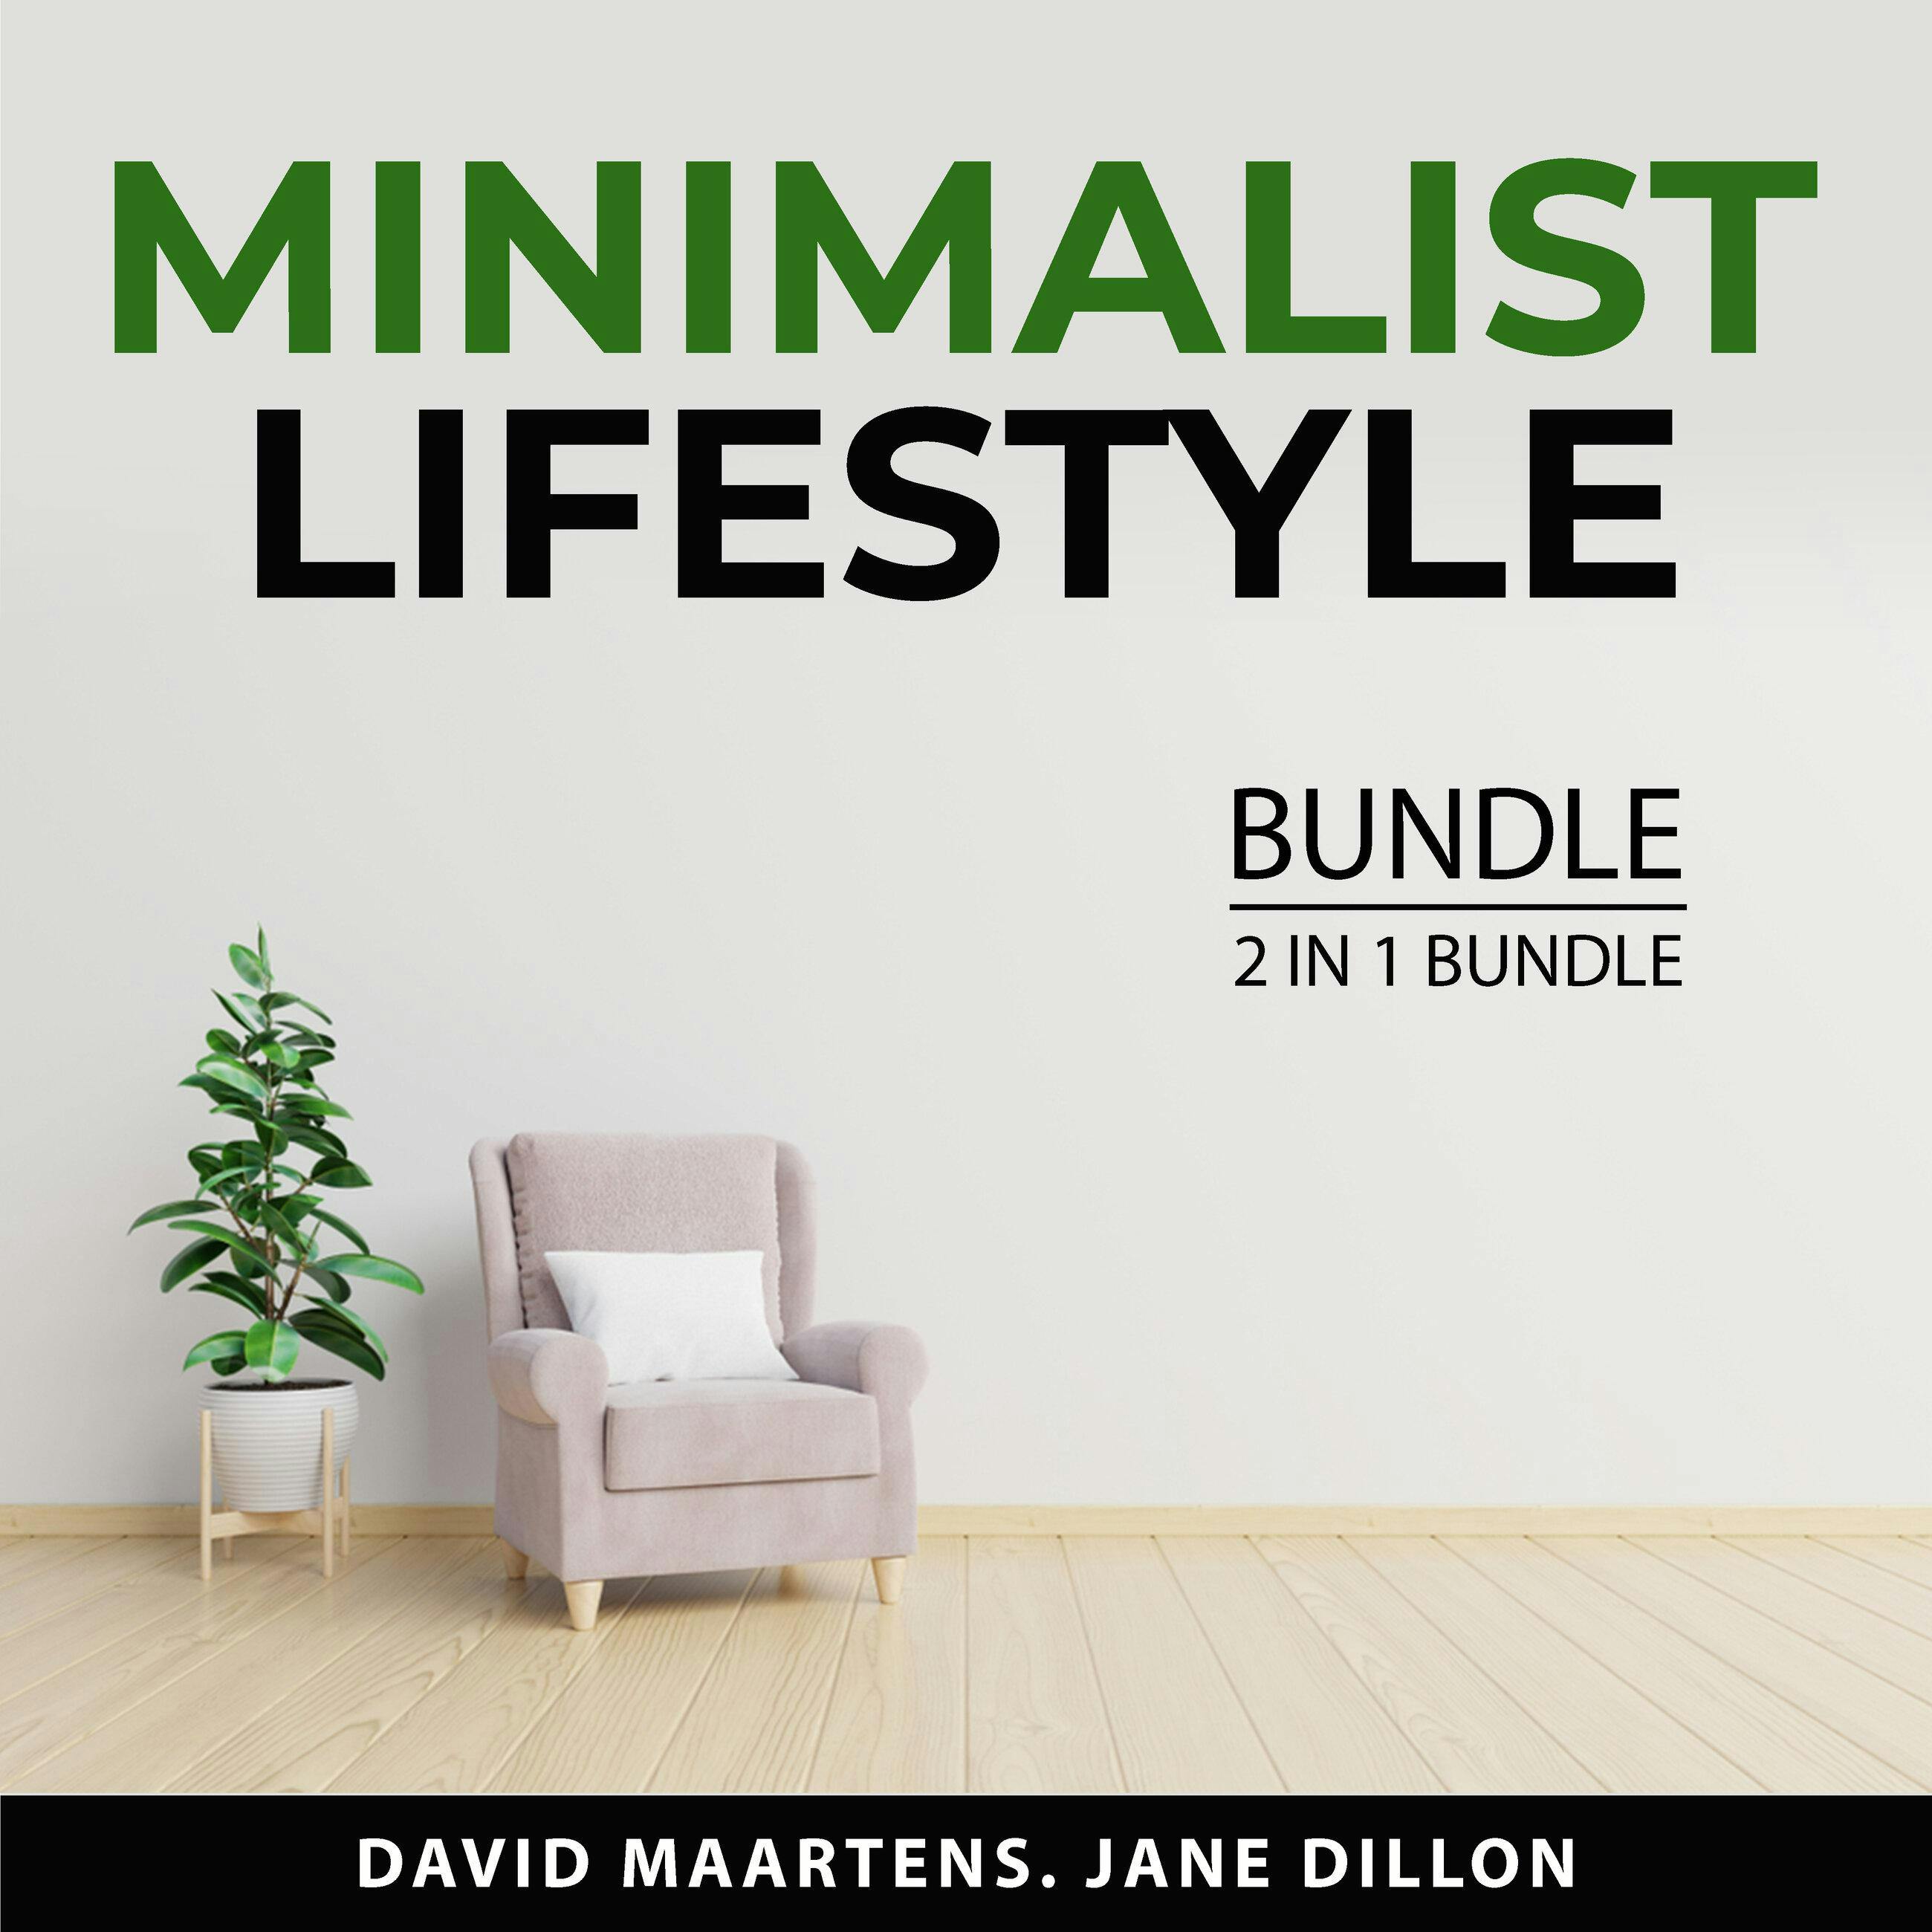 Minimalist Lifestyle Bundle, 2 in 1 Bundle: Art of Minimalism and Declutter and Organize Your Home - undefined